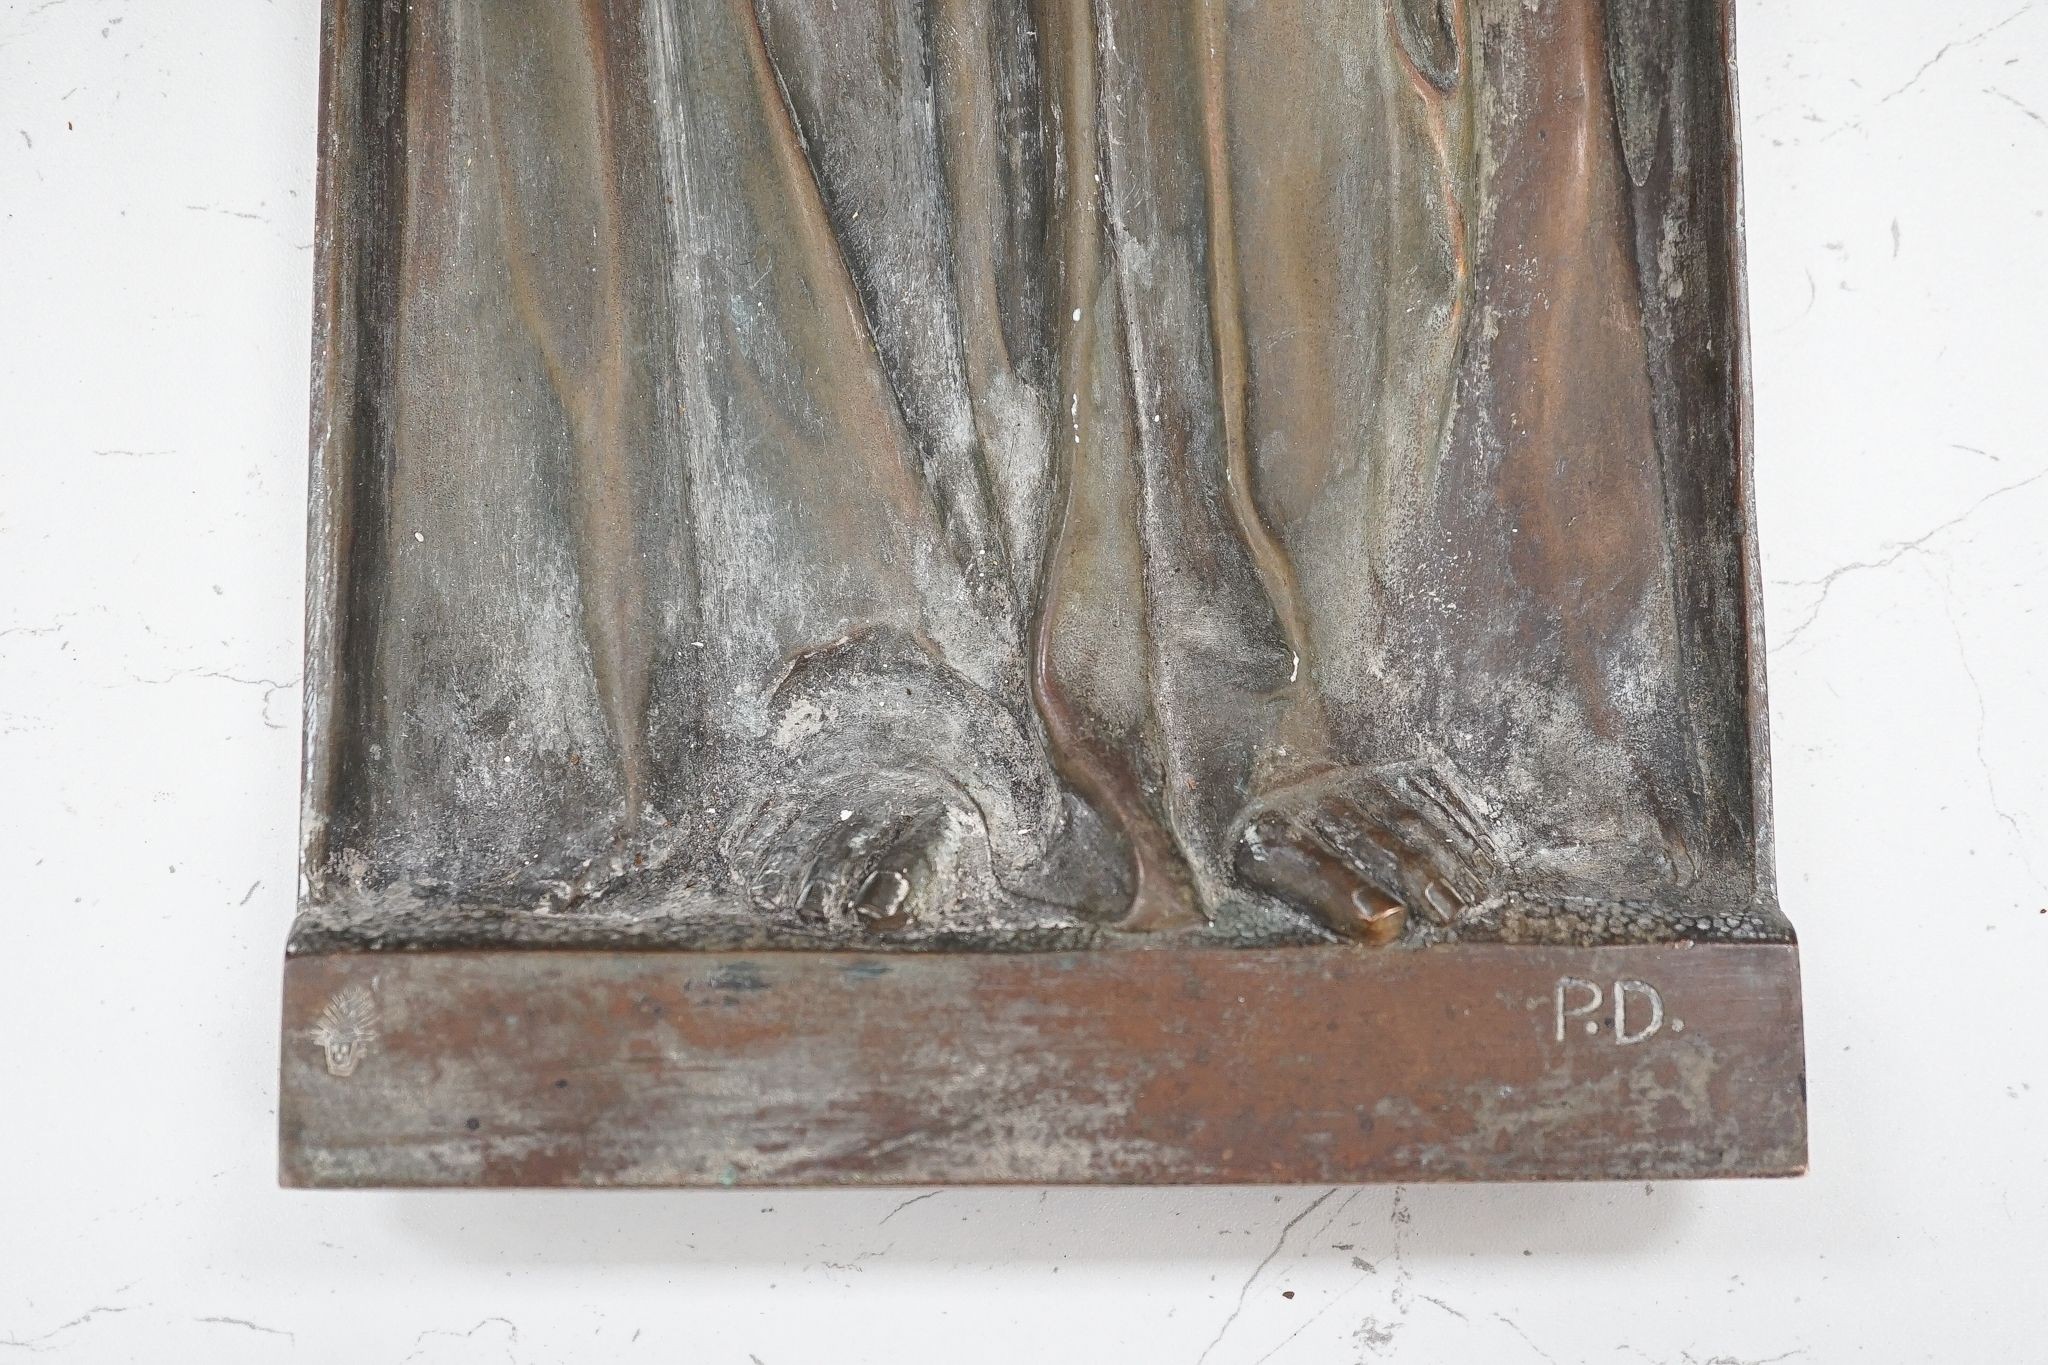 A cast bronze angel, initialled ‘P.D’ to bottom right, 72cm